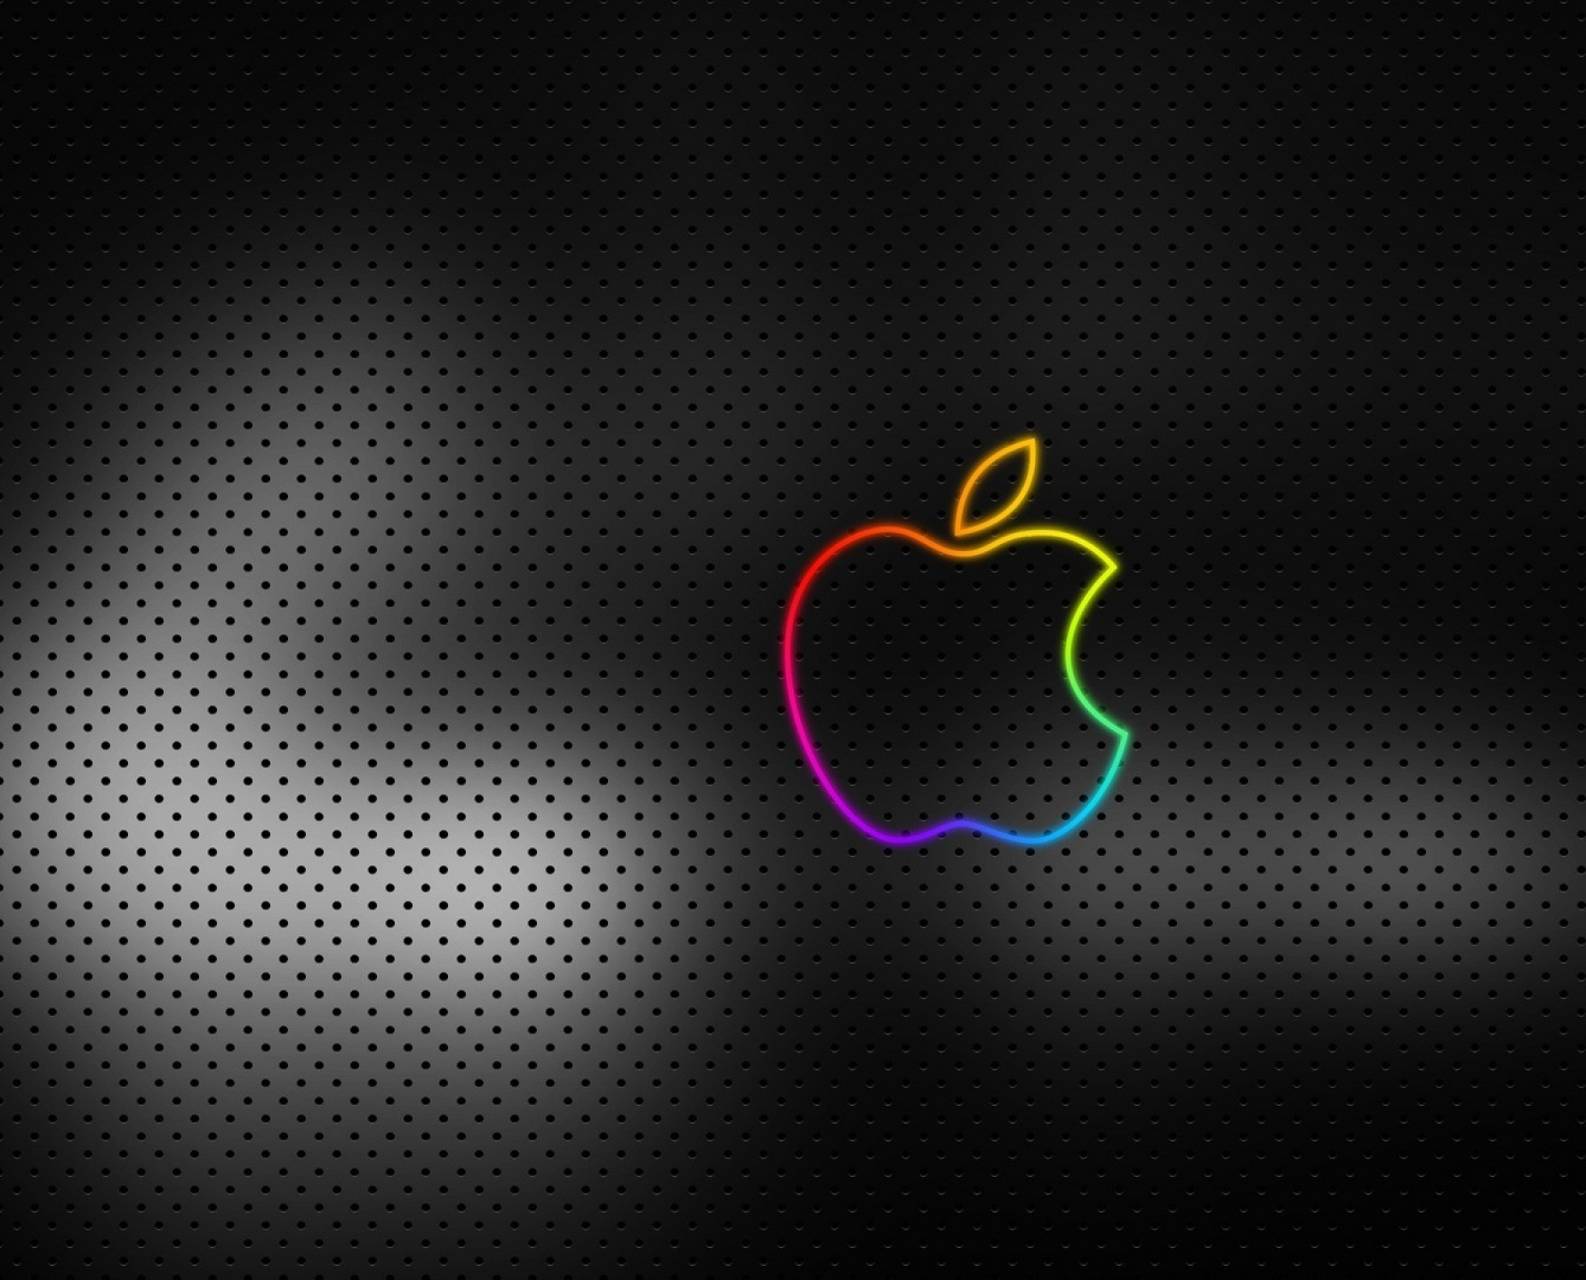 Download free apple logo wallpaper for your mobile phone